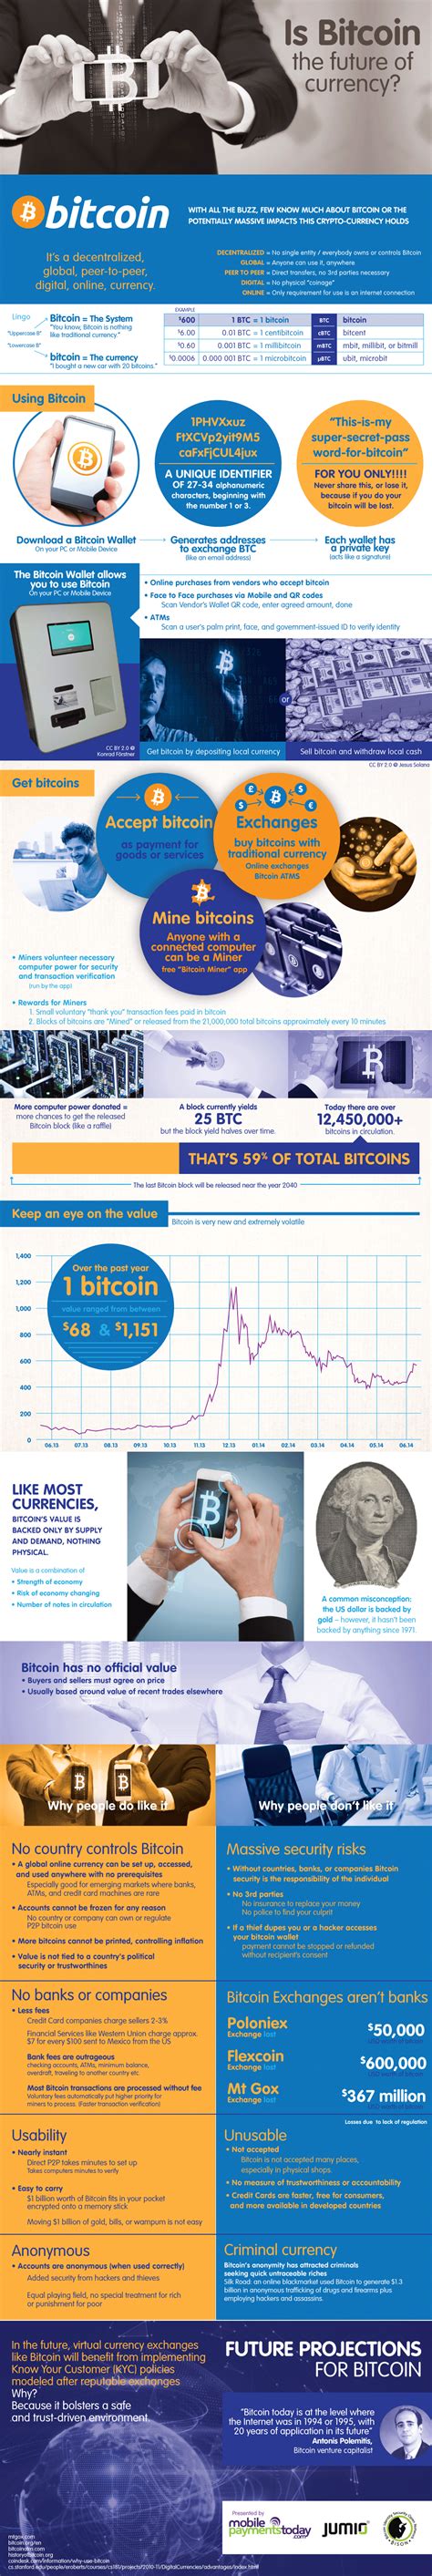 What is the future of bitcoin? Is Bitcoin the Future of Currency? #infographic - Visualistan